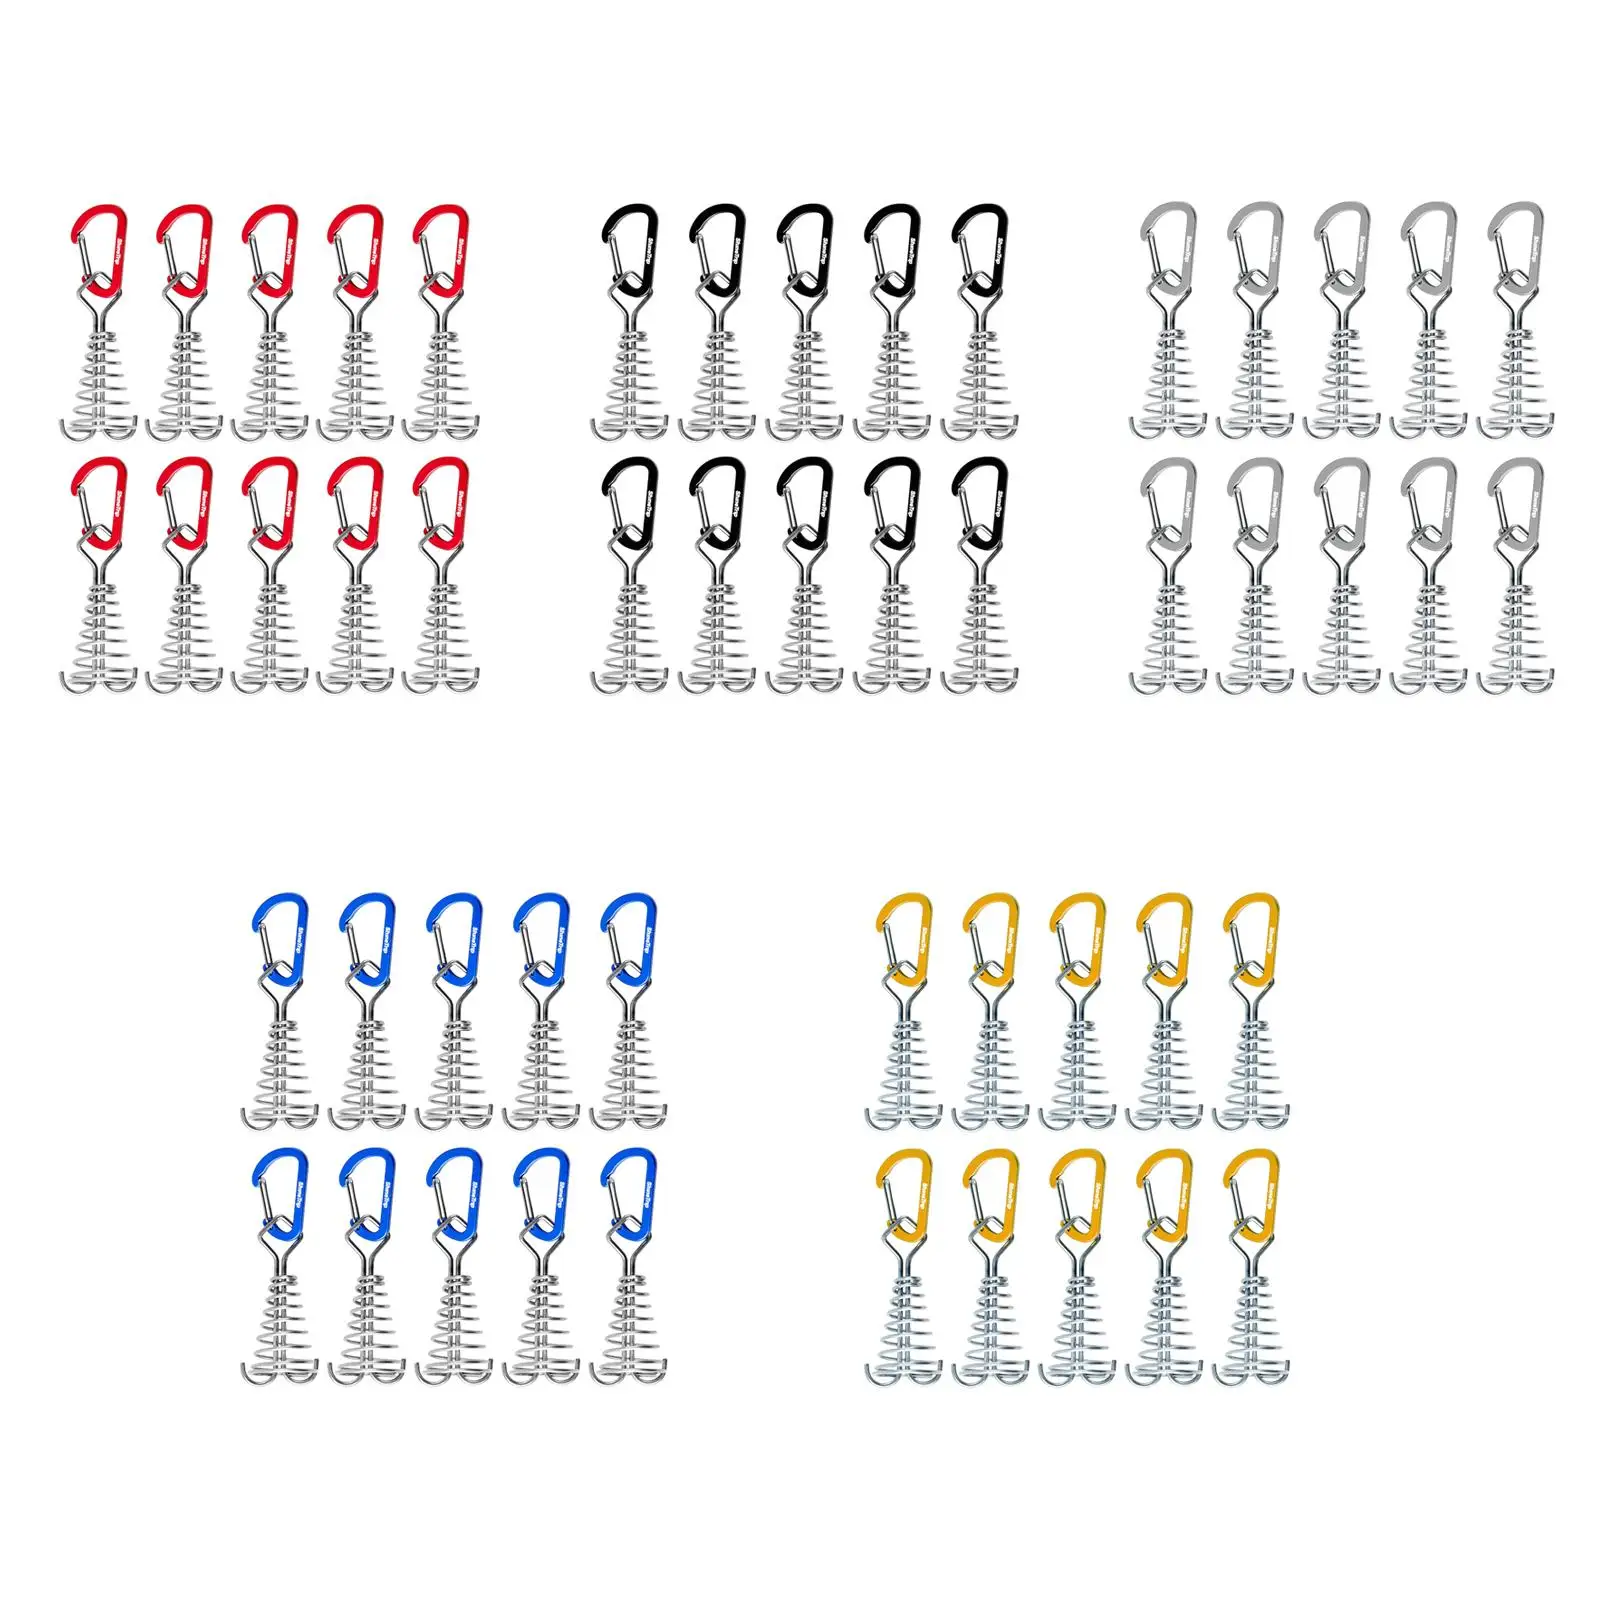 10x Deck Anchor Pegs Awning Anchor Canopy Tent Anchors with Carabiner Clips for